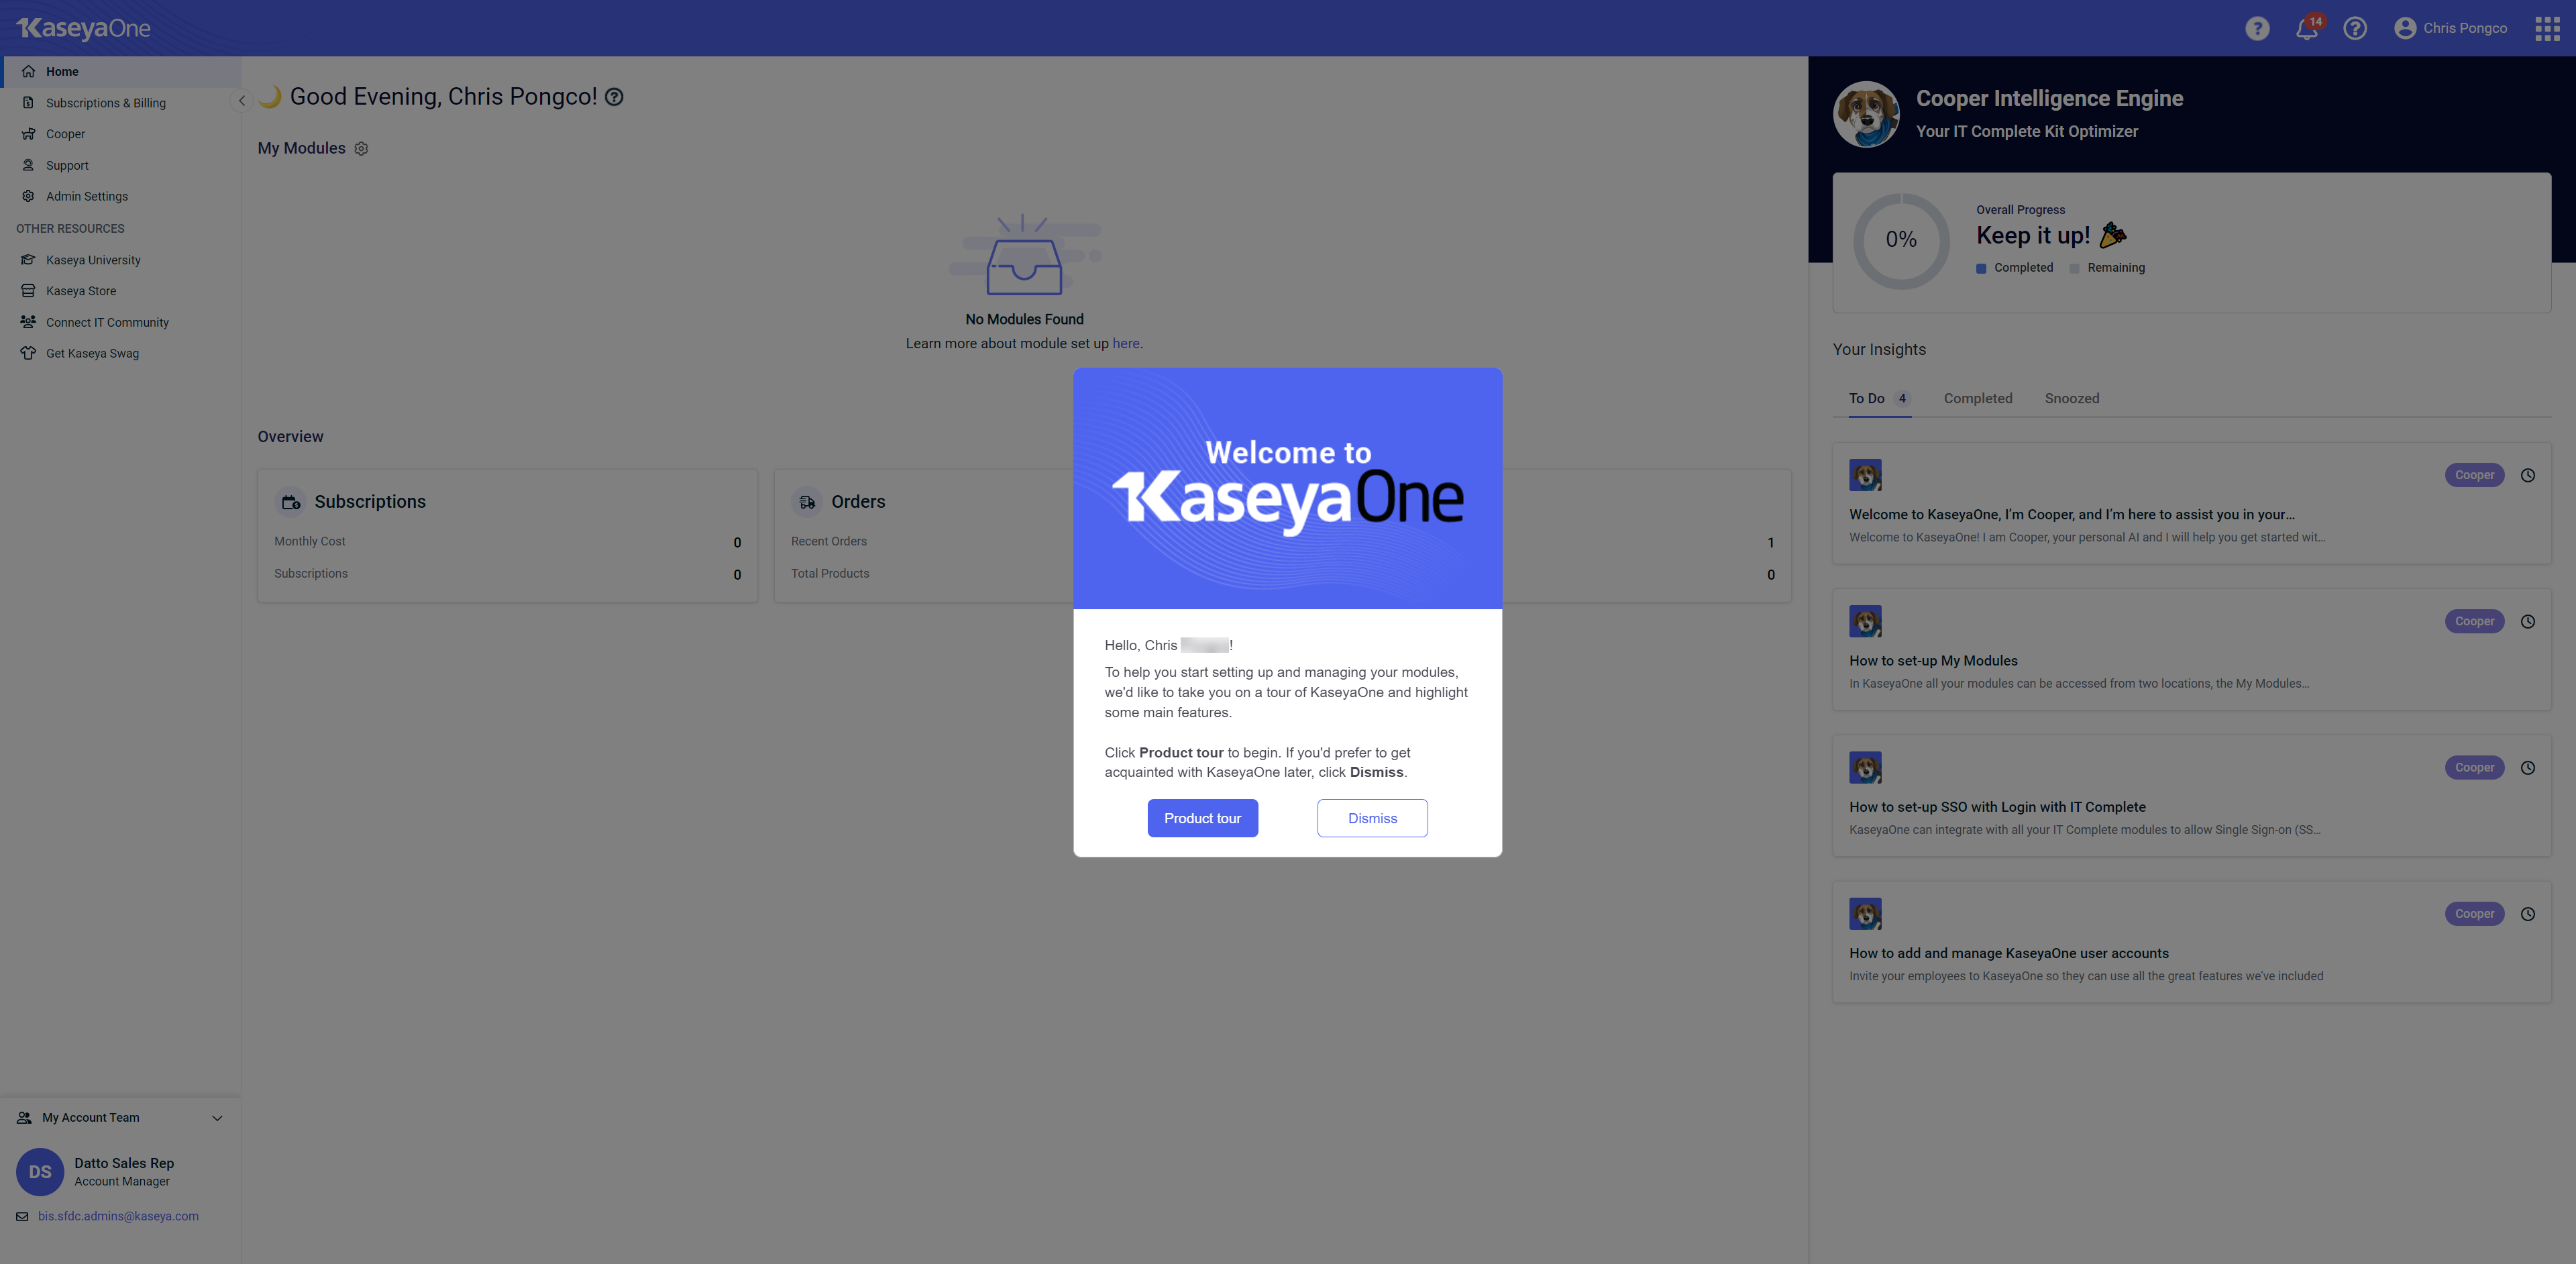 KaseyaOne guided onboarding product tour.